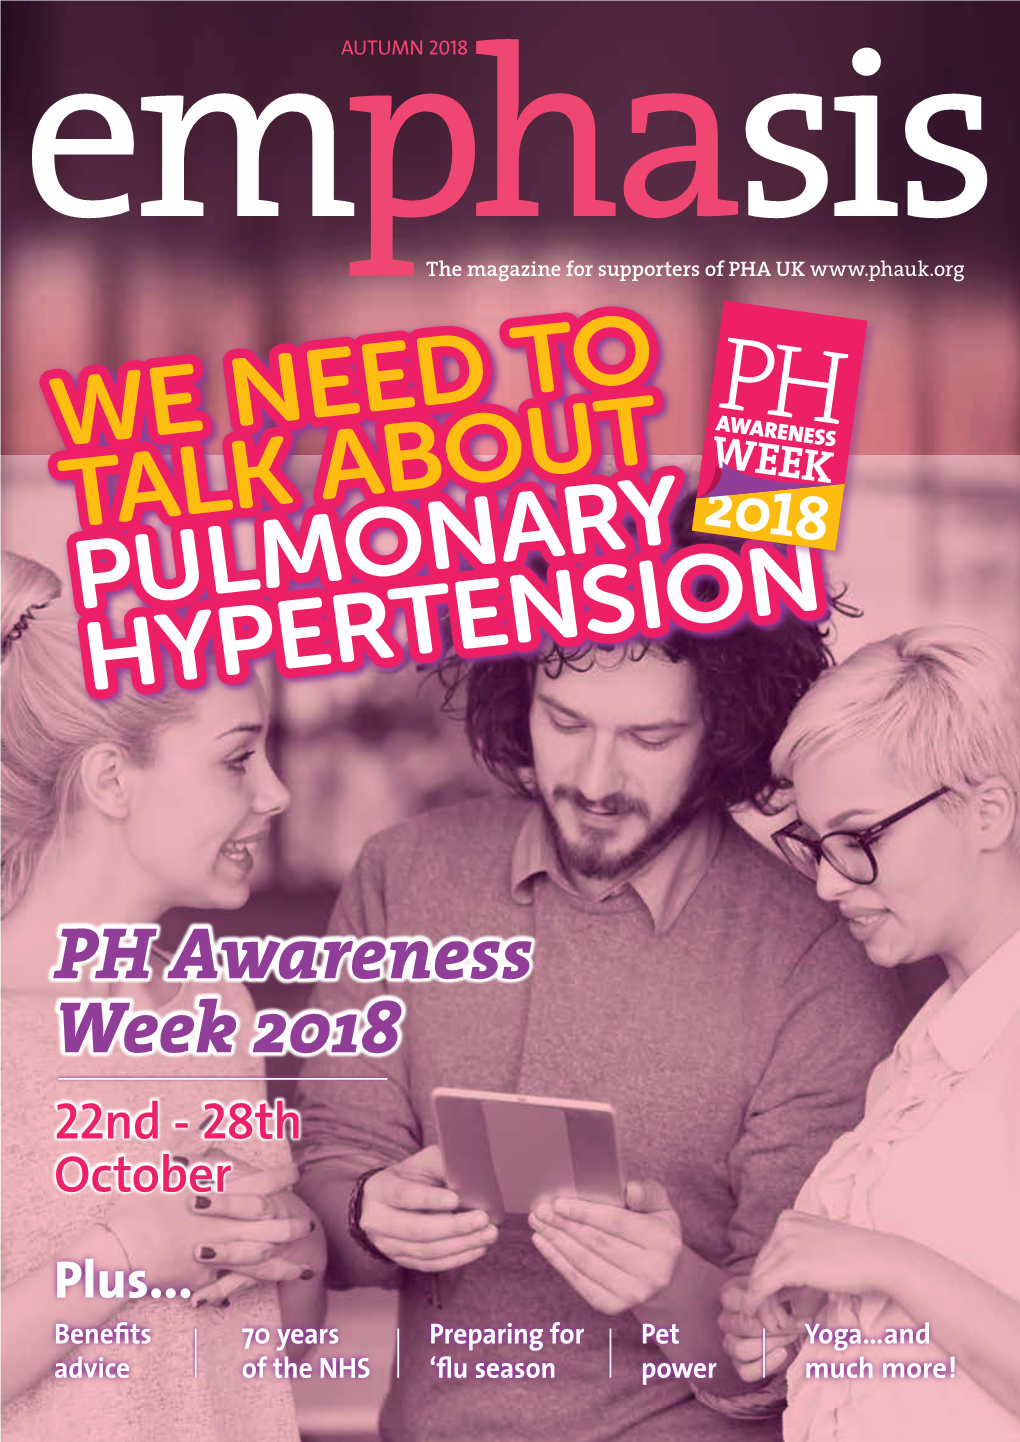 It's So Important That We Talk About Pulmonary Hypertension